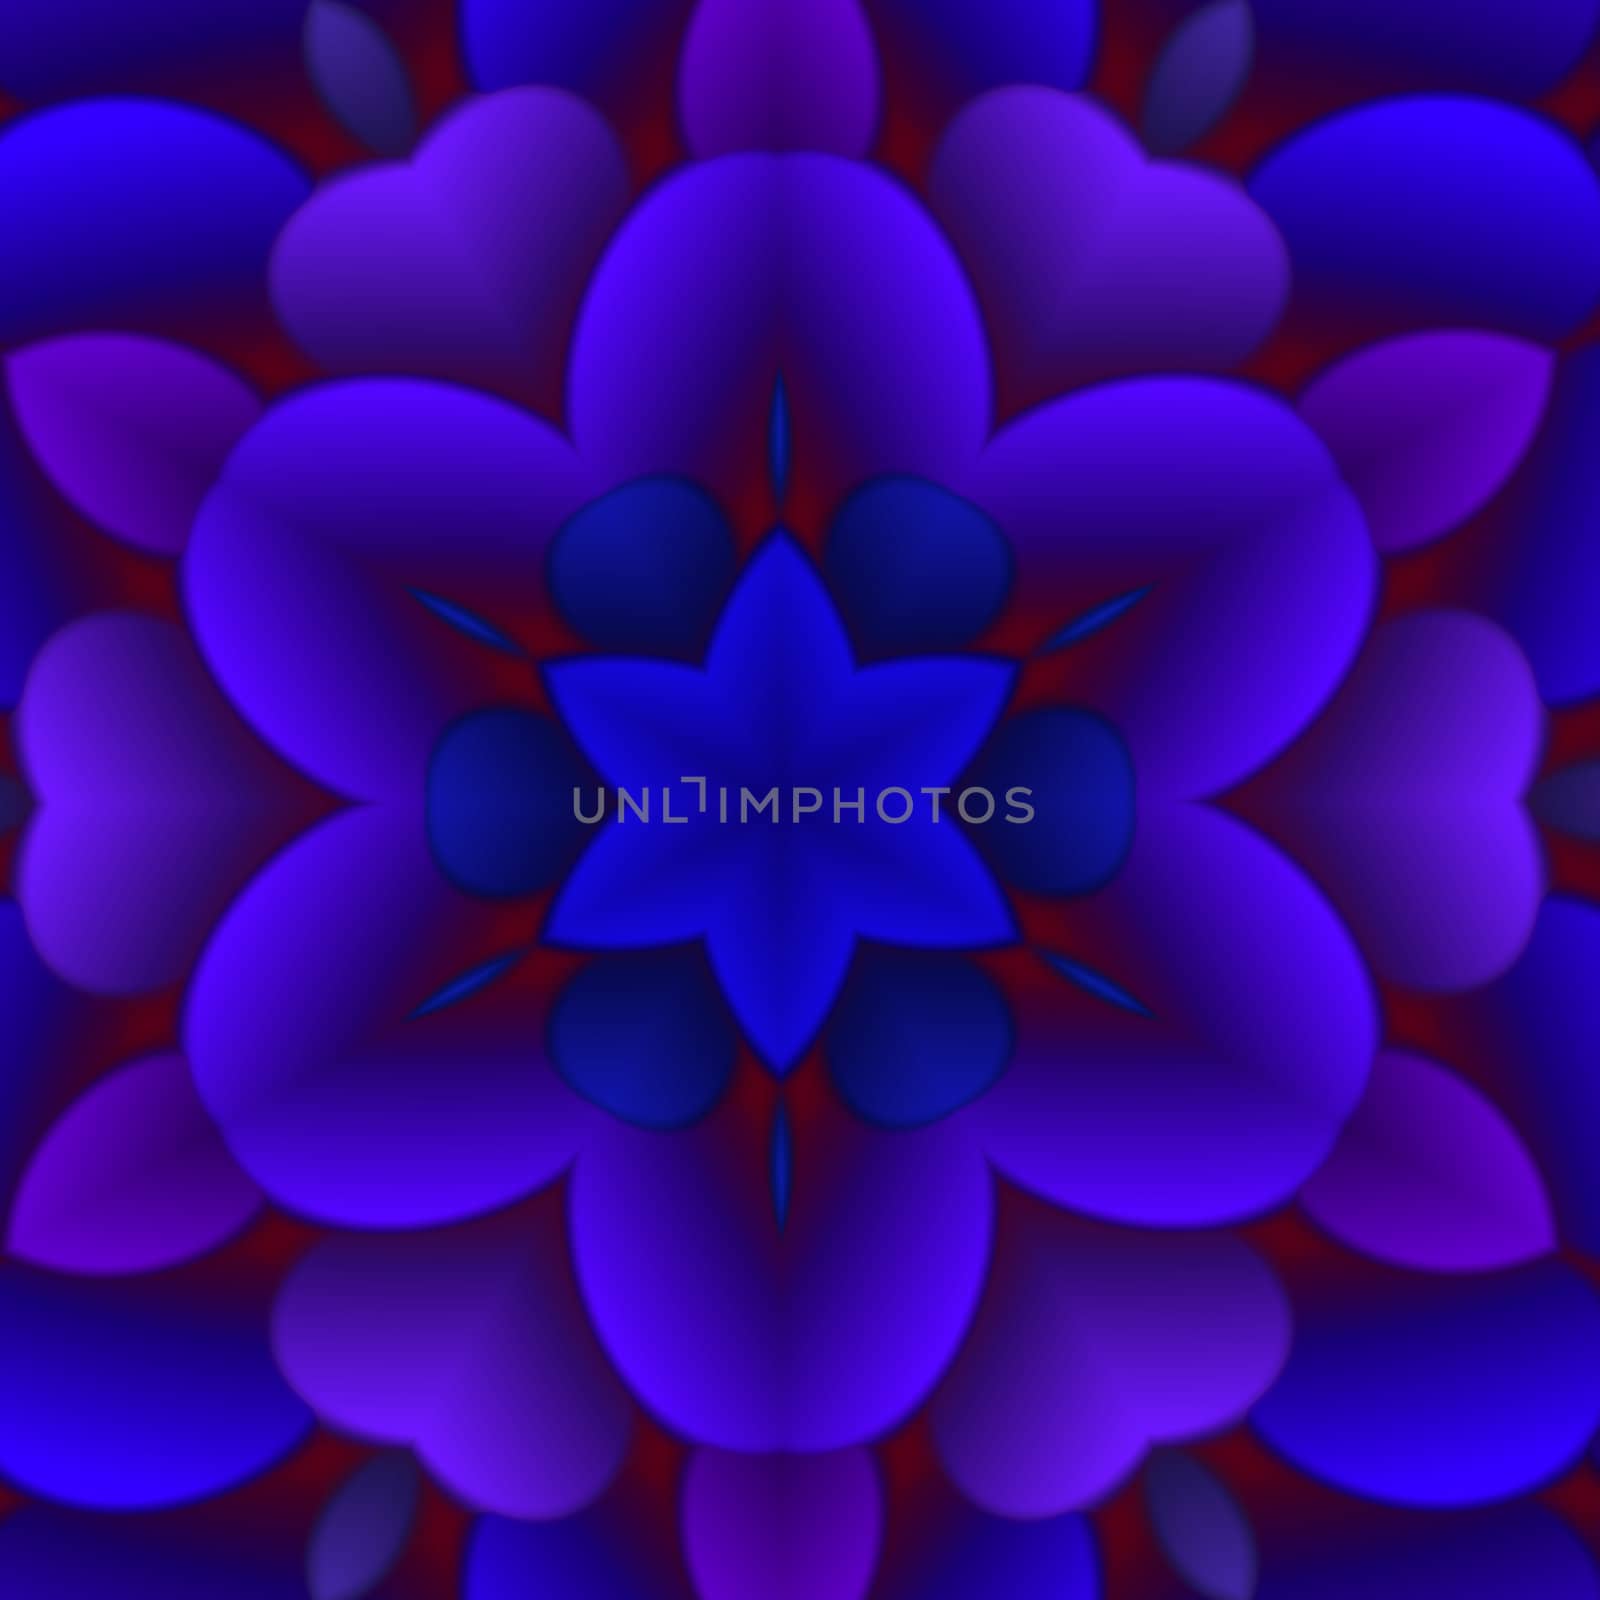 An abstract illustration of a blue and purple floral pattern with a glowing red background.